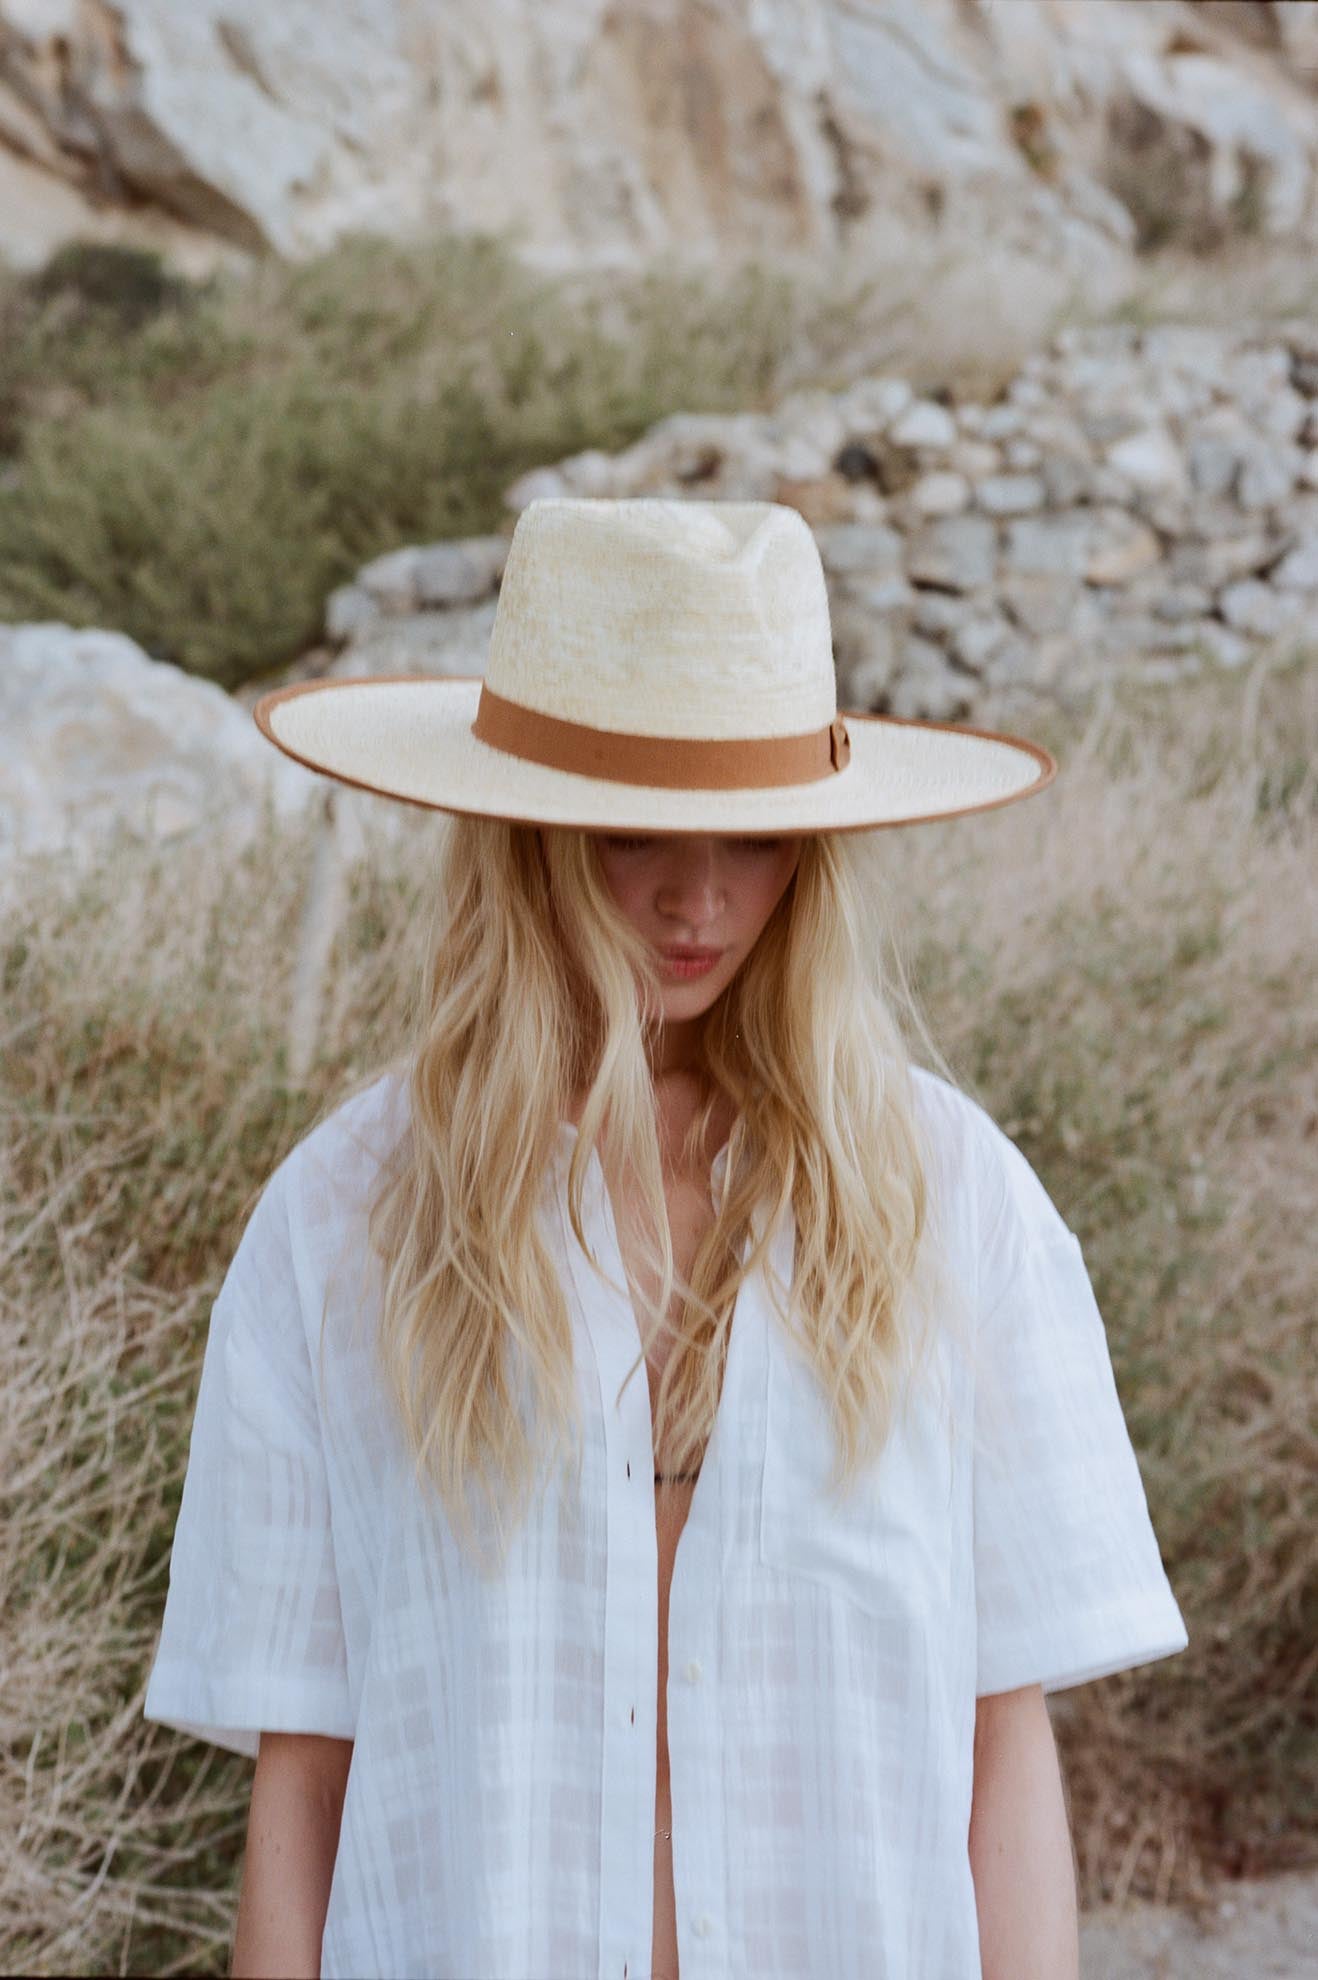 Straw Panama Hat in White for Women